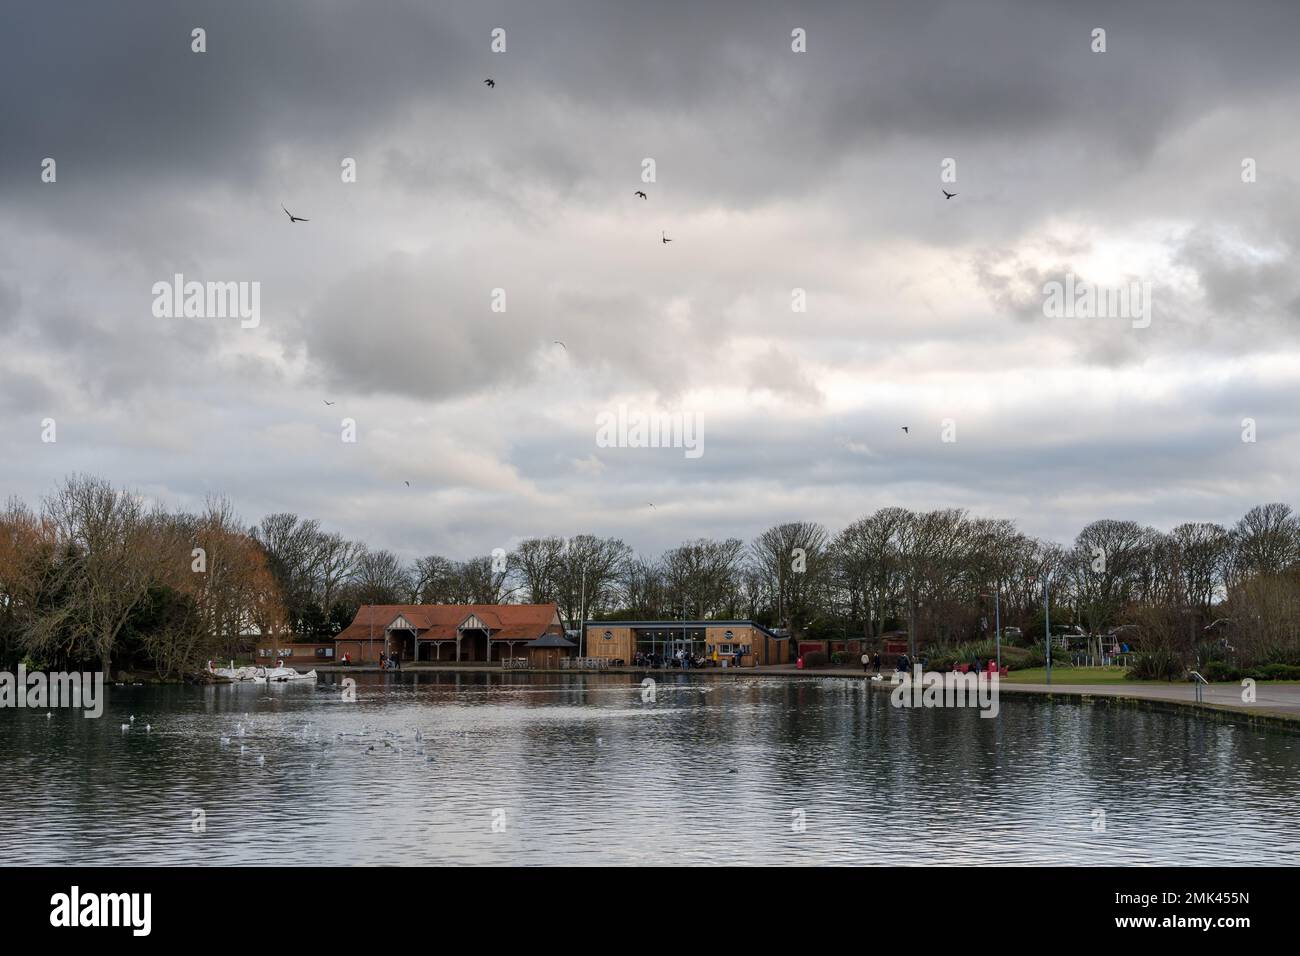 A view of Marine Park, South Shields, South Tyneside UK boating lake in winter with a dramatic sky and birds flying. Stock Photo